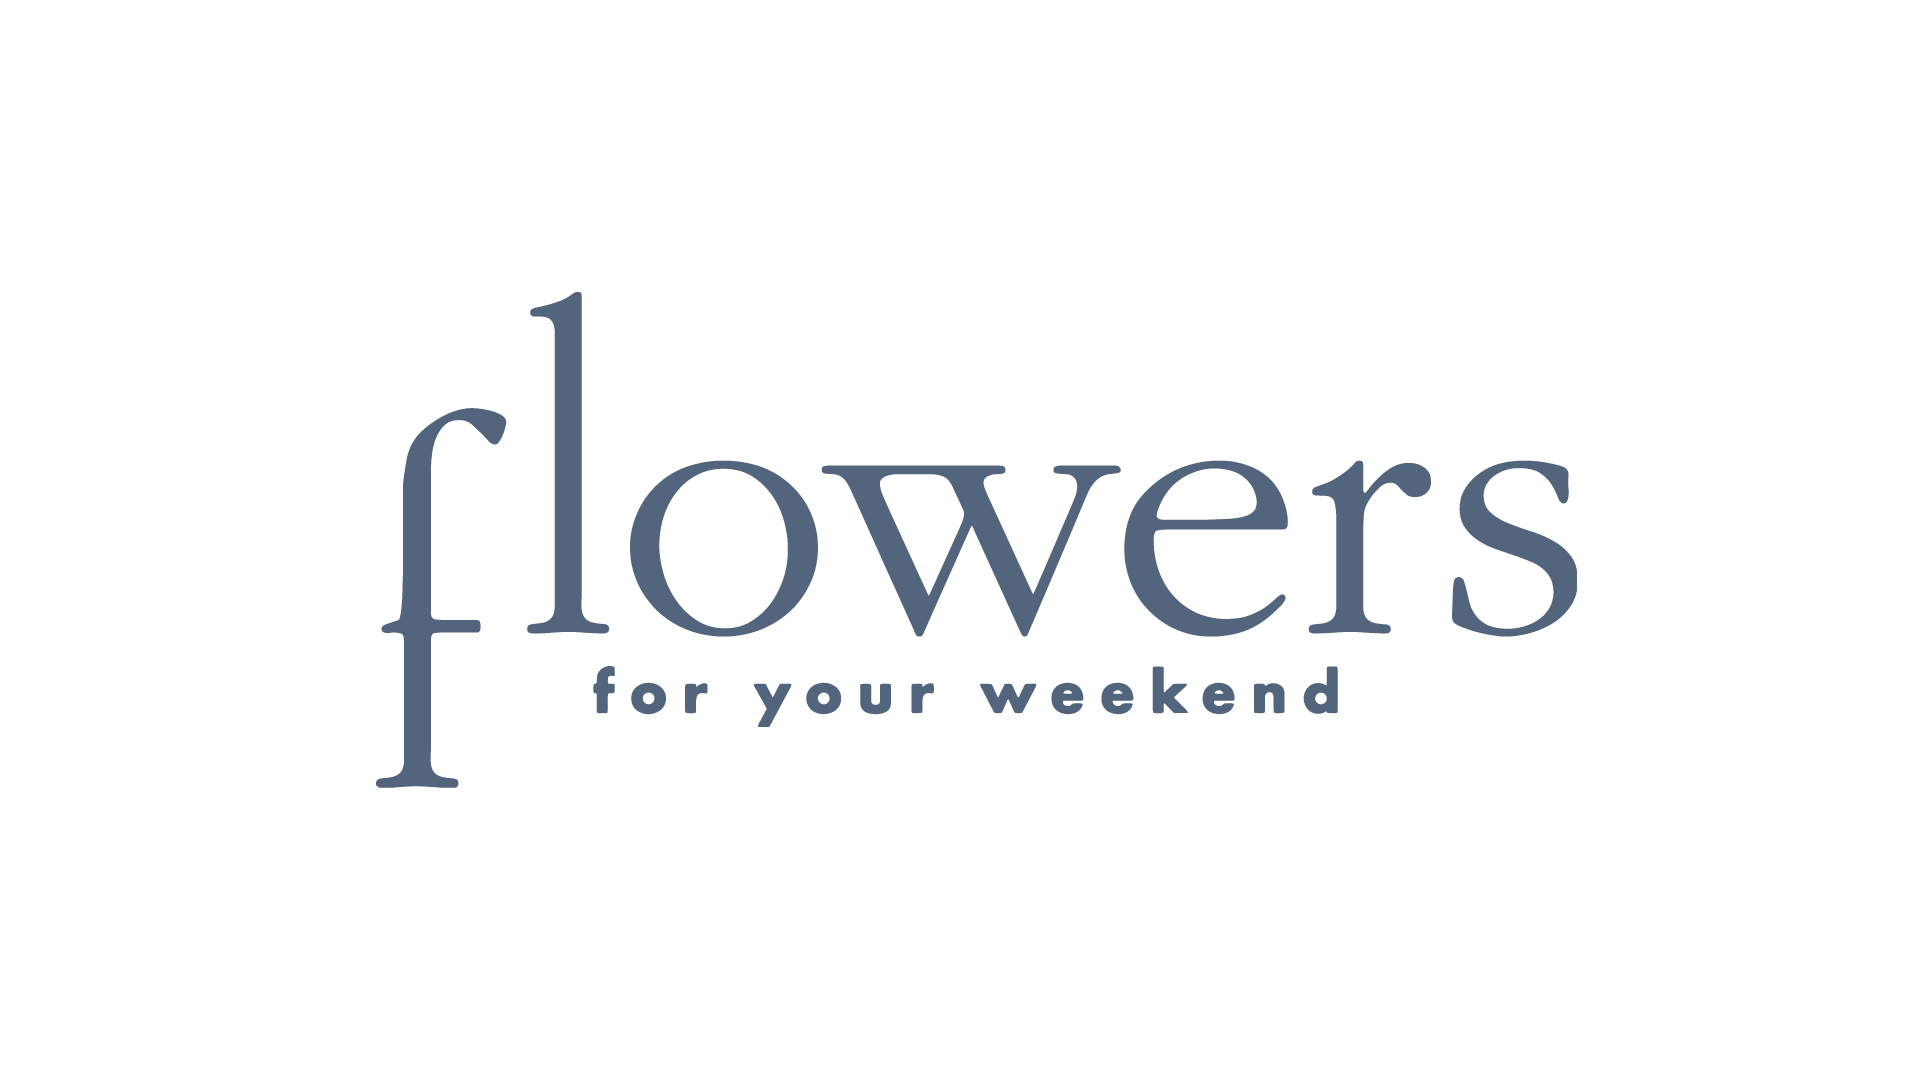 Flowers for your weekend